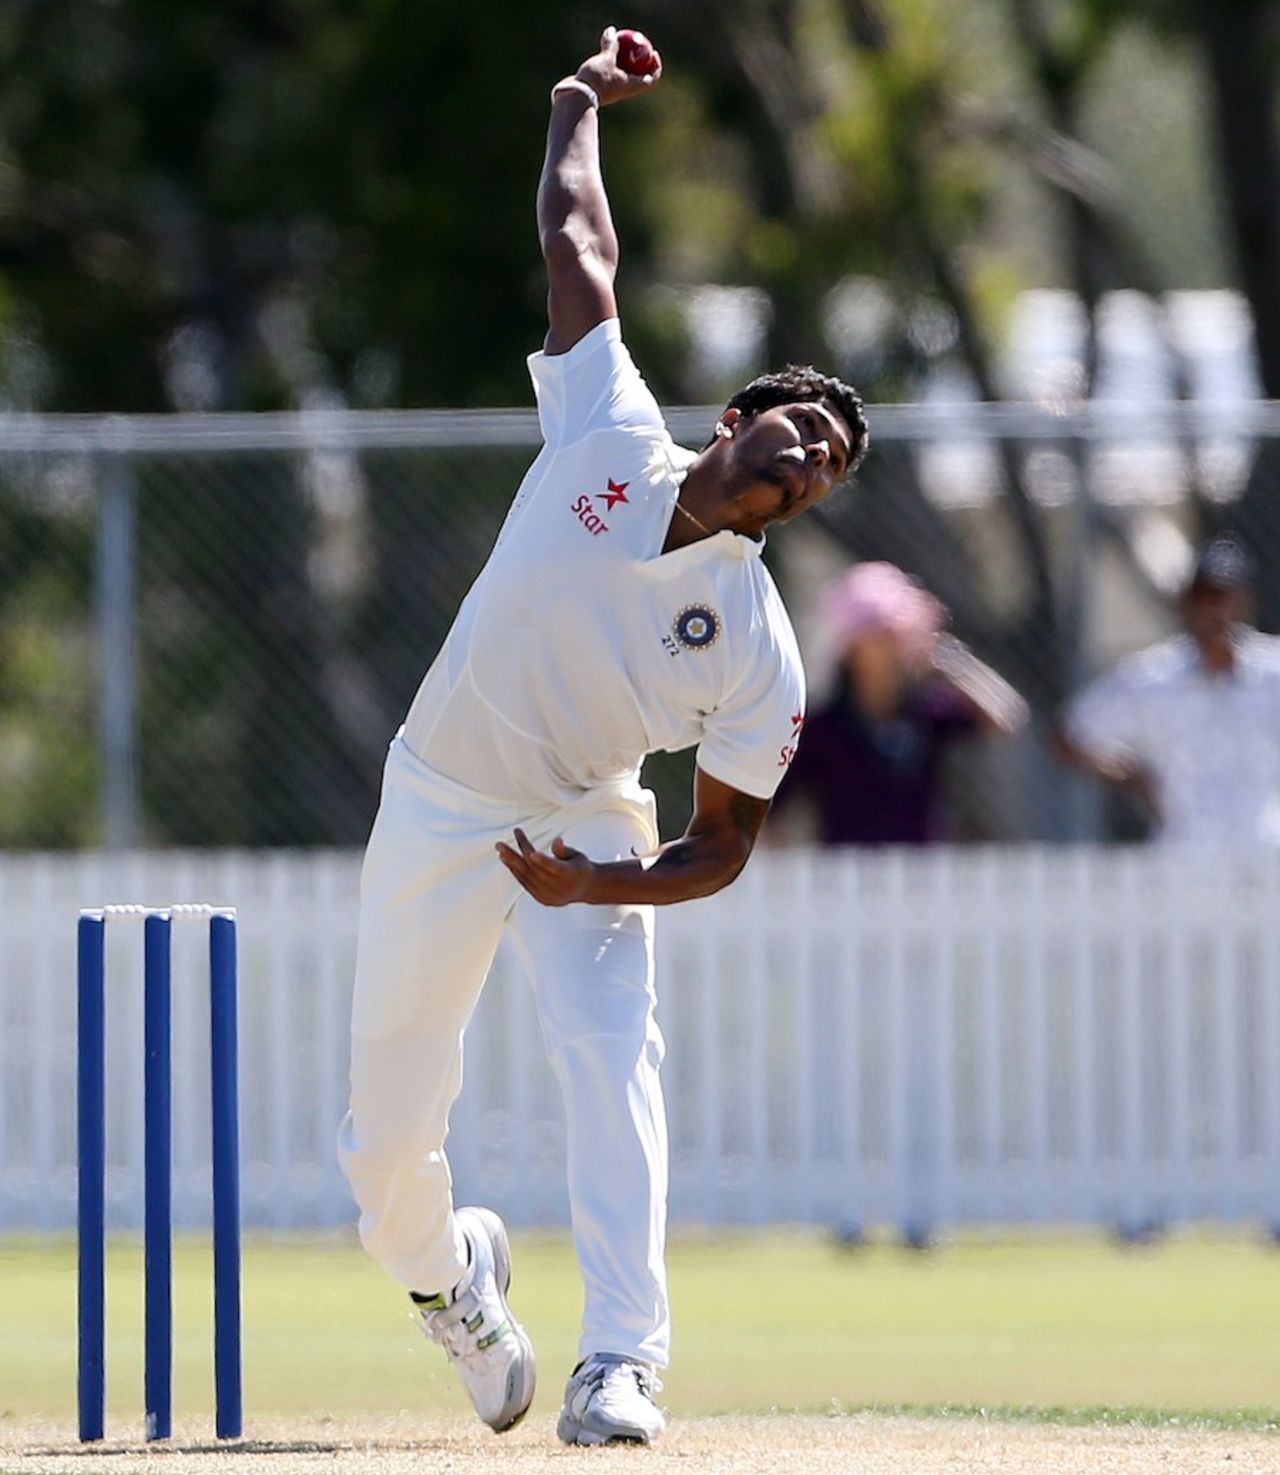 Umesh Yadav bowls during the tour game, New Zealand XI v Indians, Whangarei, 1st day, February 2, 2014